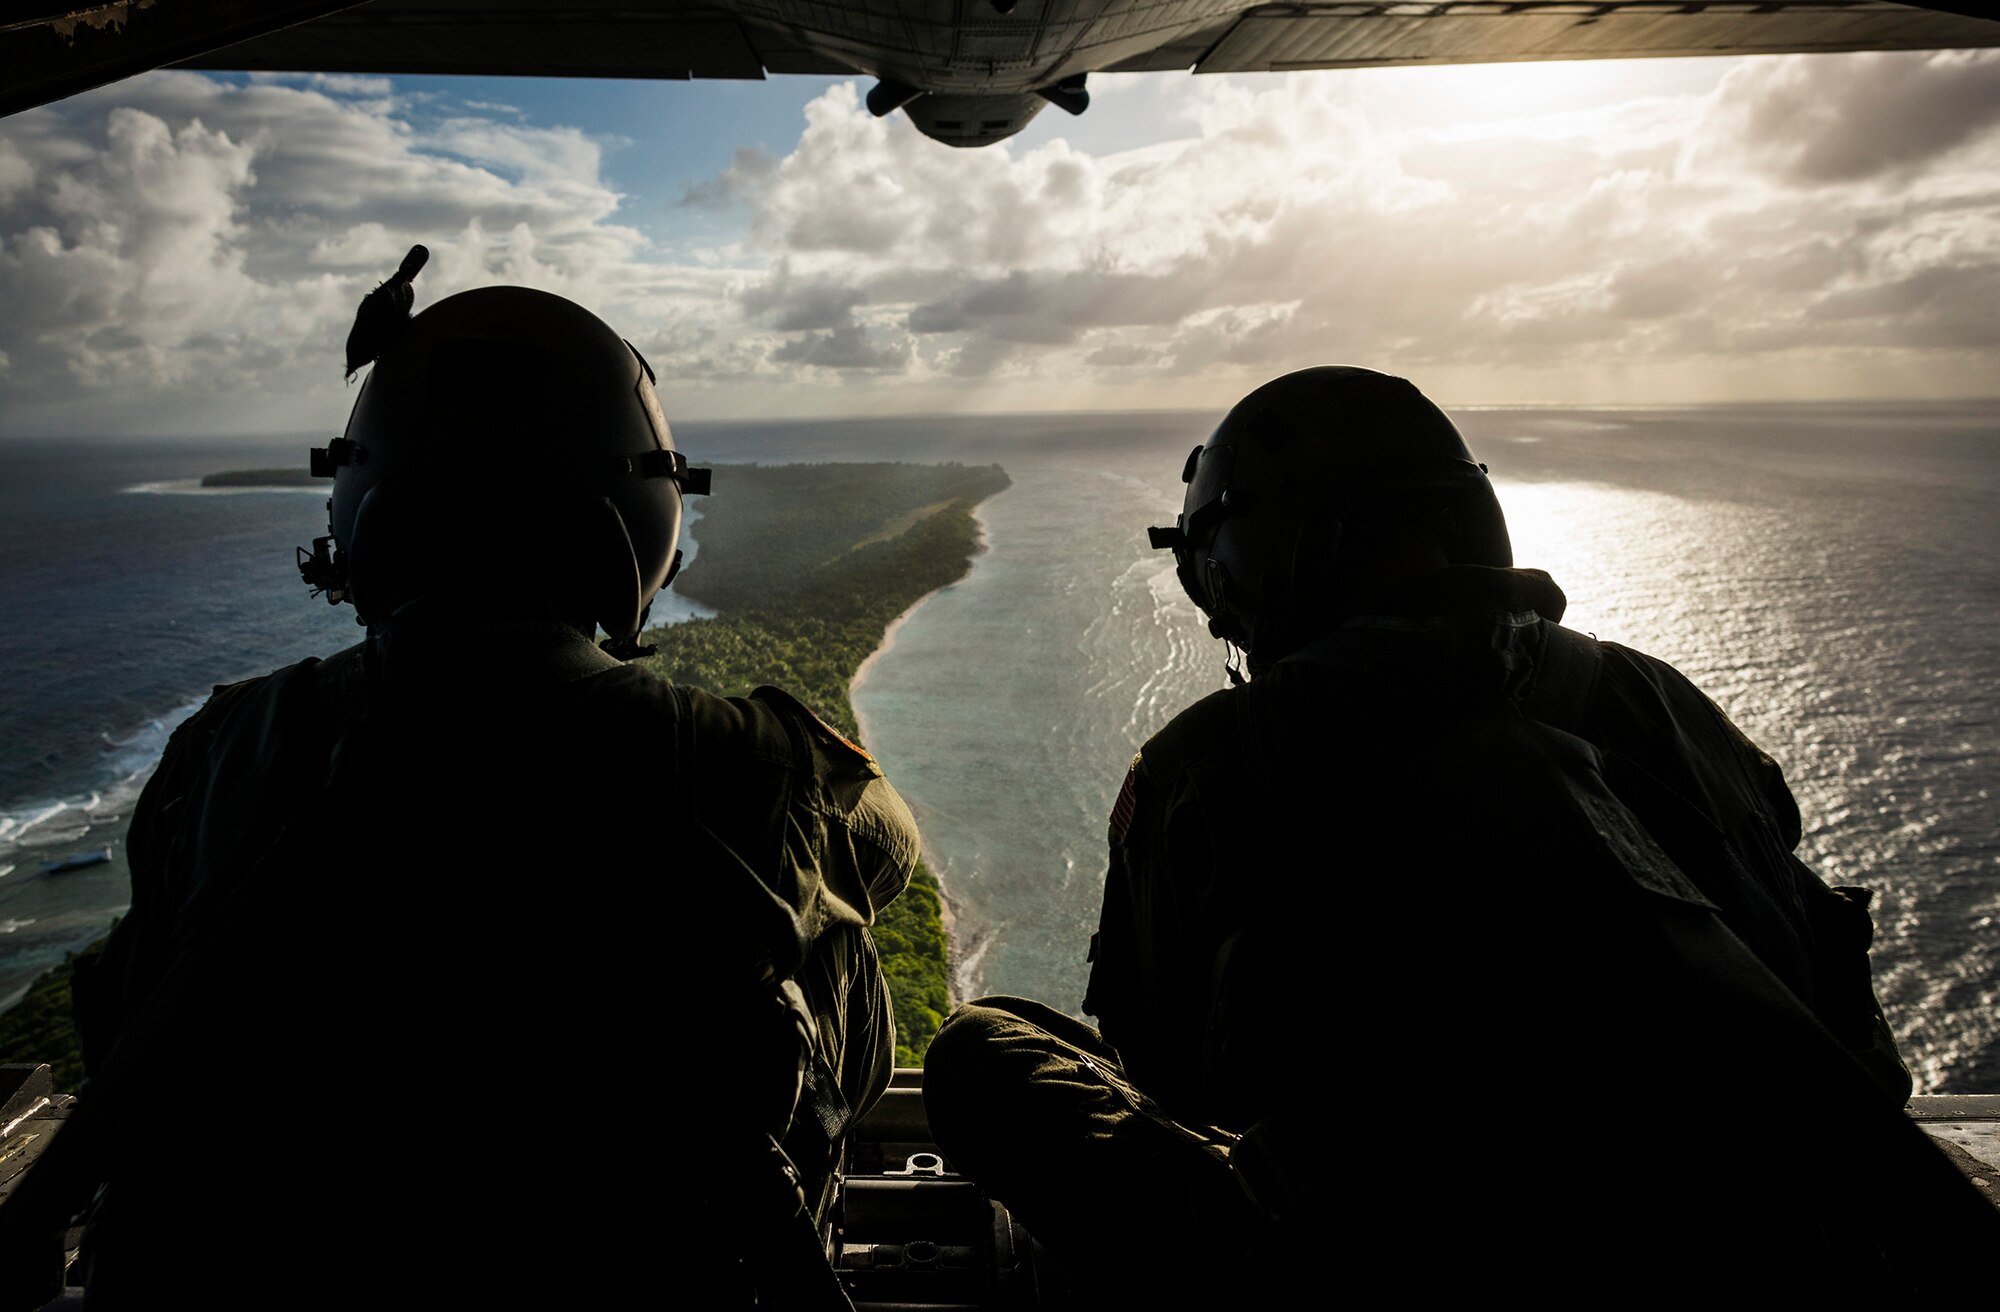 12/13/2012 - Senior Airman Timothy Oberman, left, and Staff Sgt. Nick Alarcon, loadmasters with the 36th Airlift Squadron, Yokota Air Base, Japan, watch out the back of a C-130H aircraft after dropping the first pallet of humanitarian goods to the island of Ulal Dec. 11, 2012. This year is the 61st anniversary of OCD, making it the longest running humanitarian mission in the world. (U.S. Air Force photo by Tech. Sgt. Samuel Morse/Released)